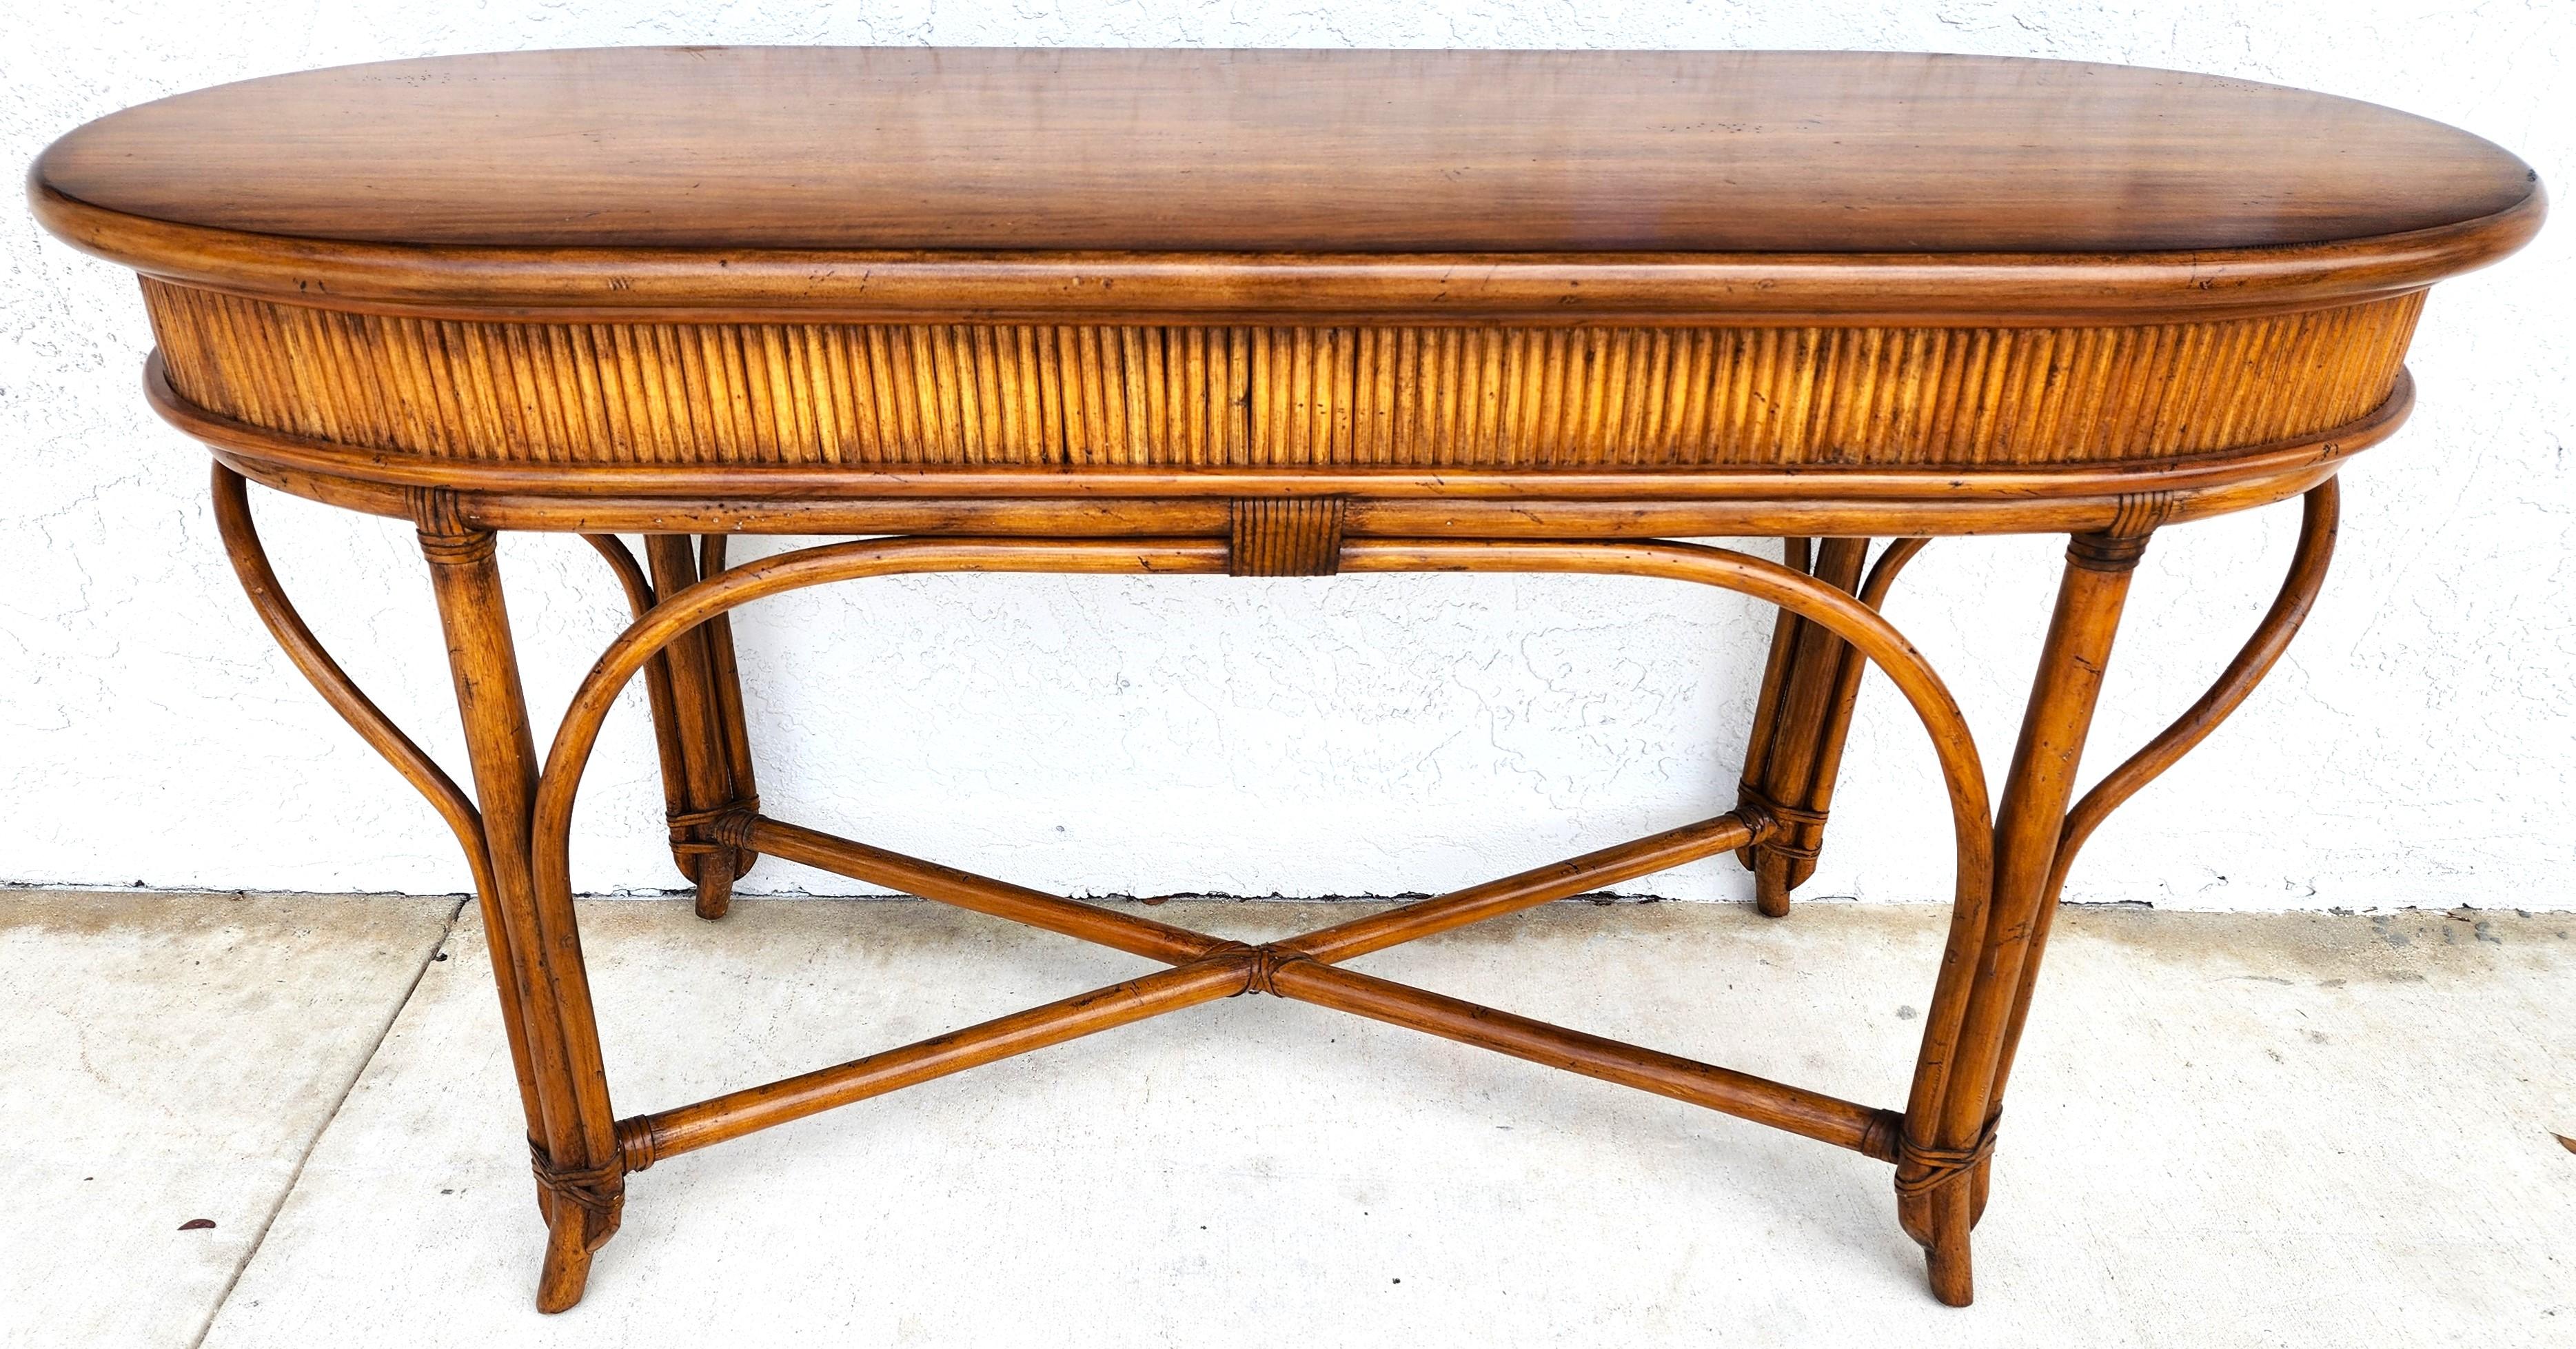 For FULL item description click on CONTINUE READING at the bottom of this page.

Offering One Of Our Recent Palm Beach Estate Fine Furniture Acquisitions Of A
Boho Bamboo Console Sofa Table
With Leather Rattan strapping 
 
Approximate